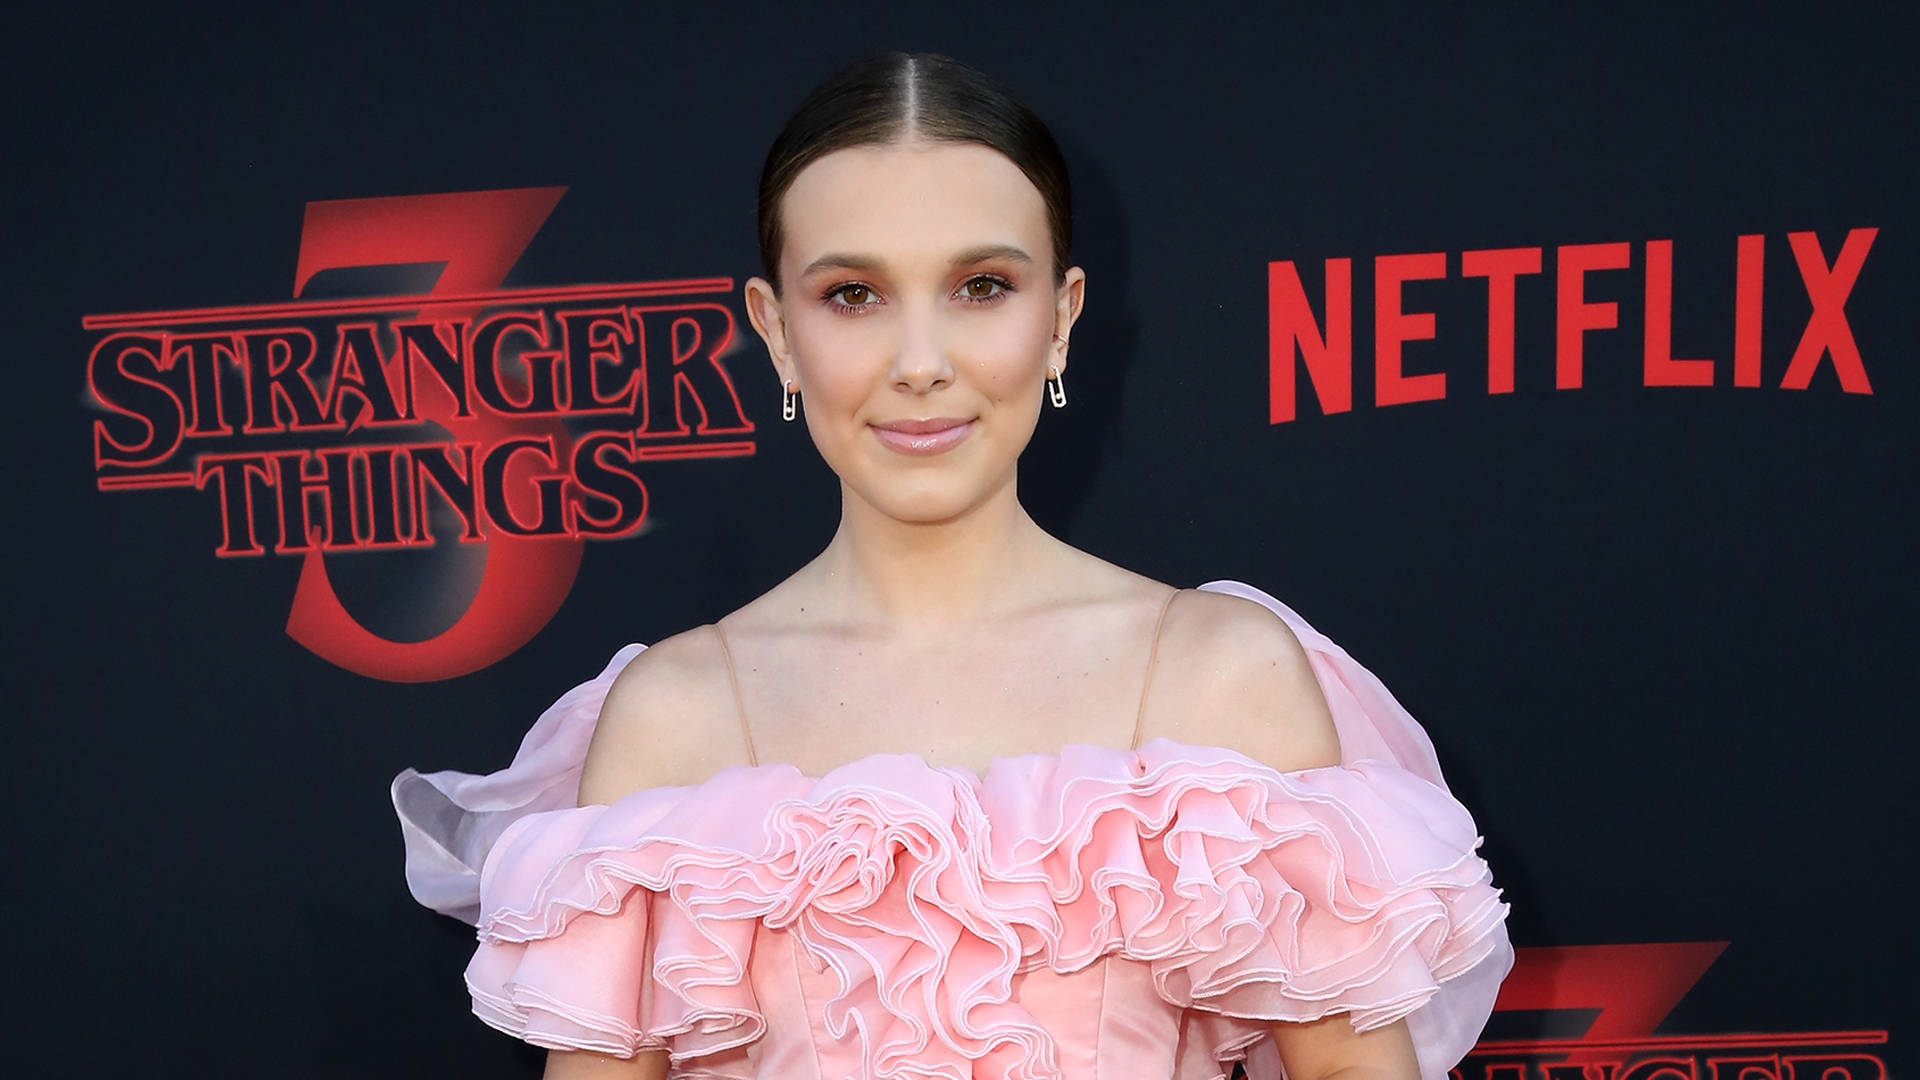 Millie Bobby Brown at the Netflix Premiere Wallpaper